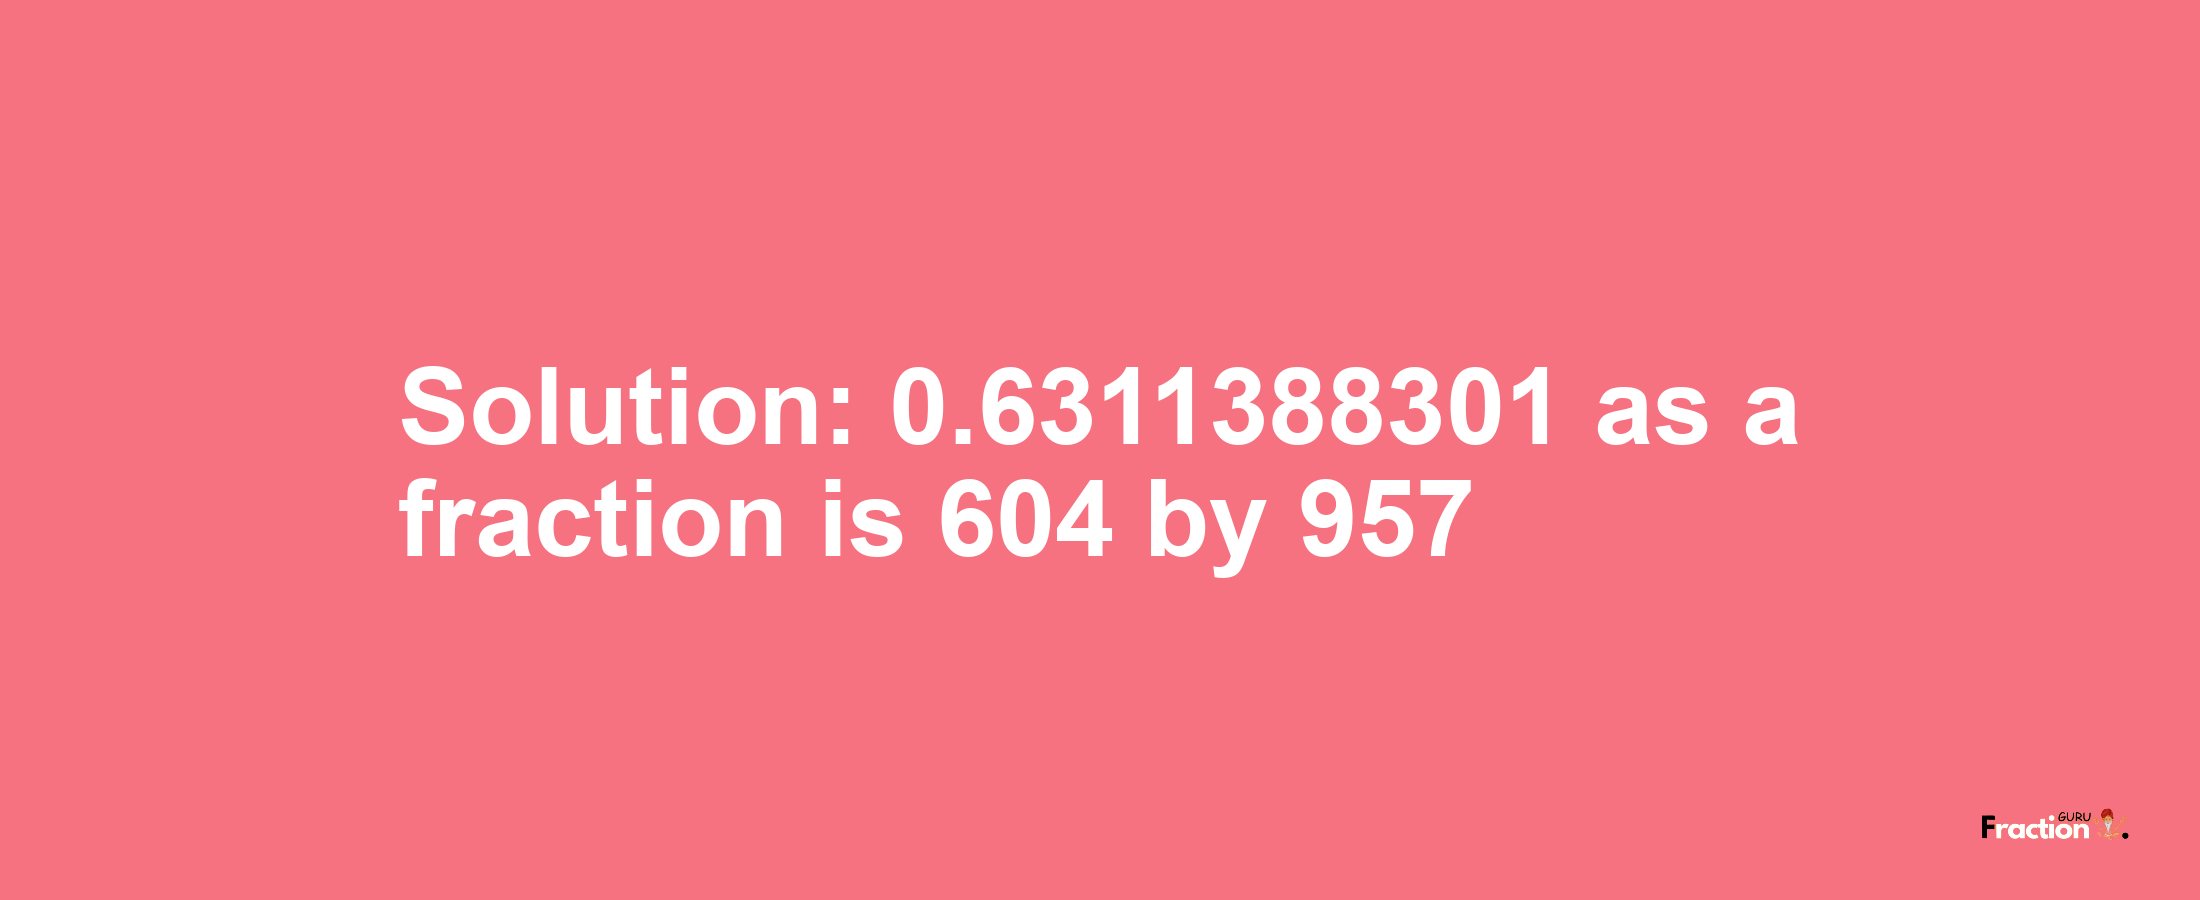 Solution:0.6311388301 as a fraction is 604/957